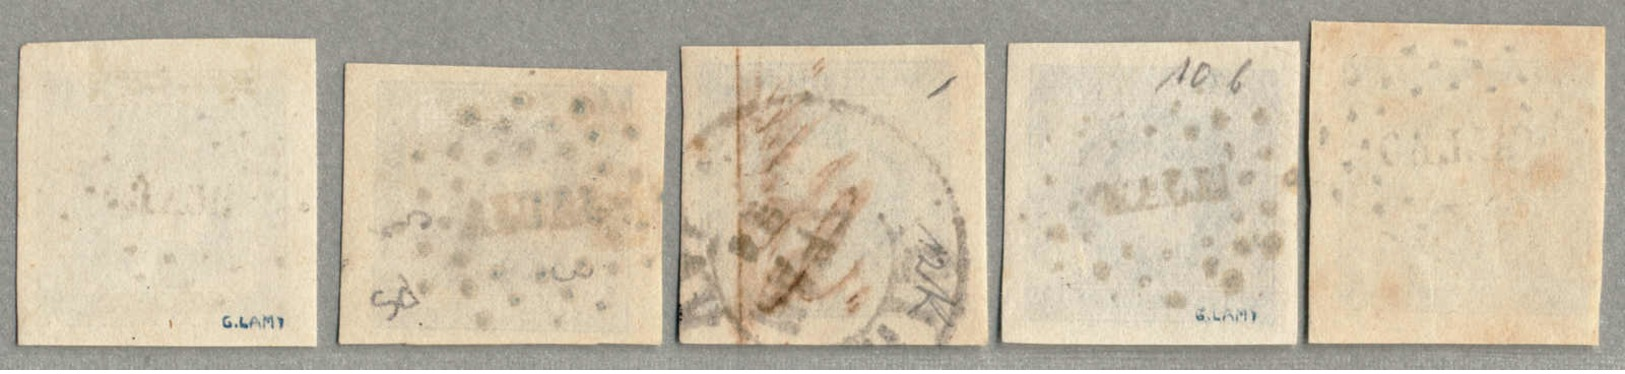 Gest. 1858, 1 D., Deep Blue And Blue, Small Lot Of (5), (4) With Type 24 Cancel (see G. Lamy - Peru Cancellations), (2)  - Peru